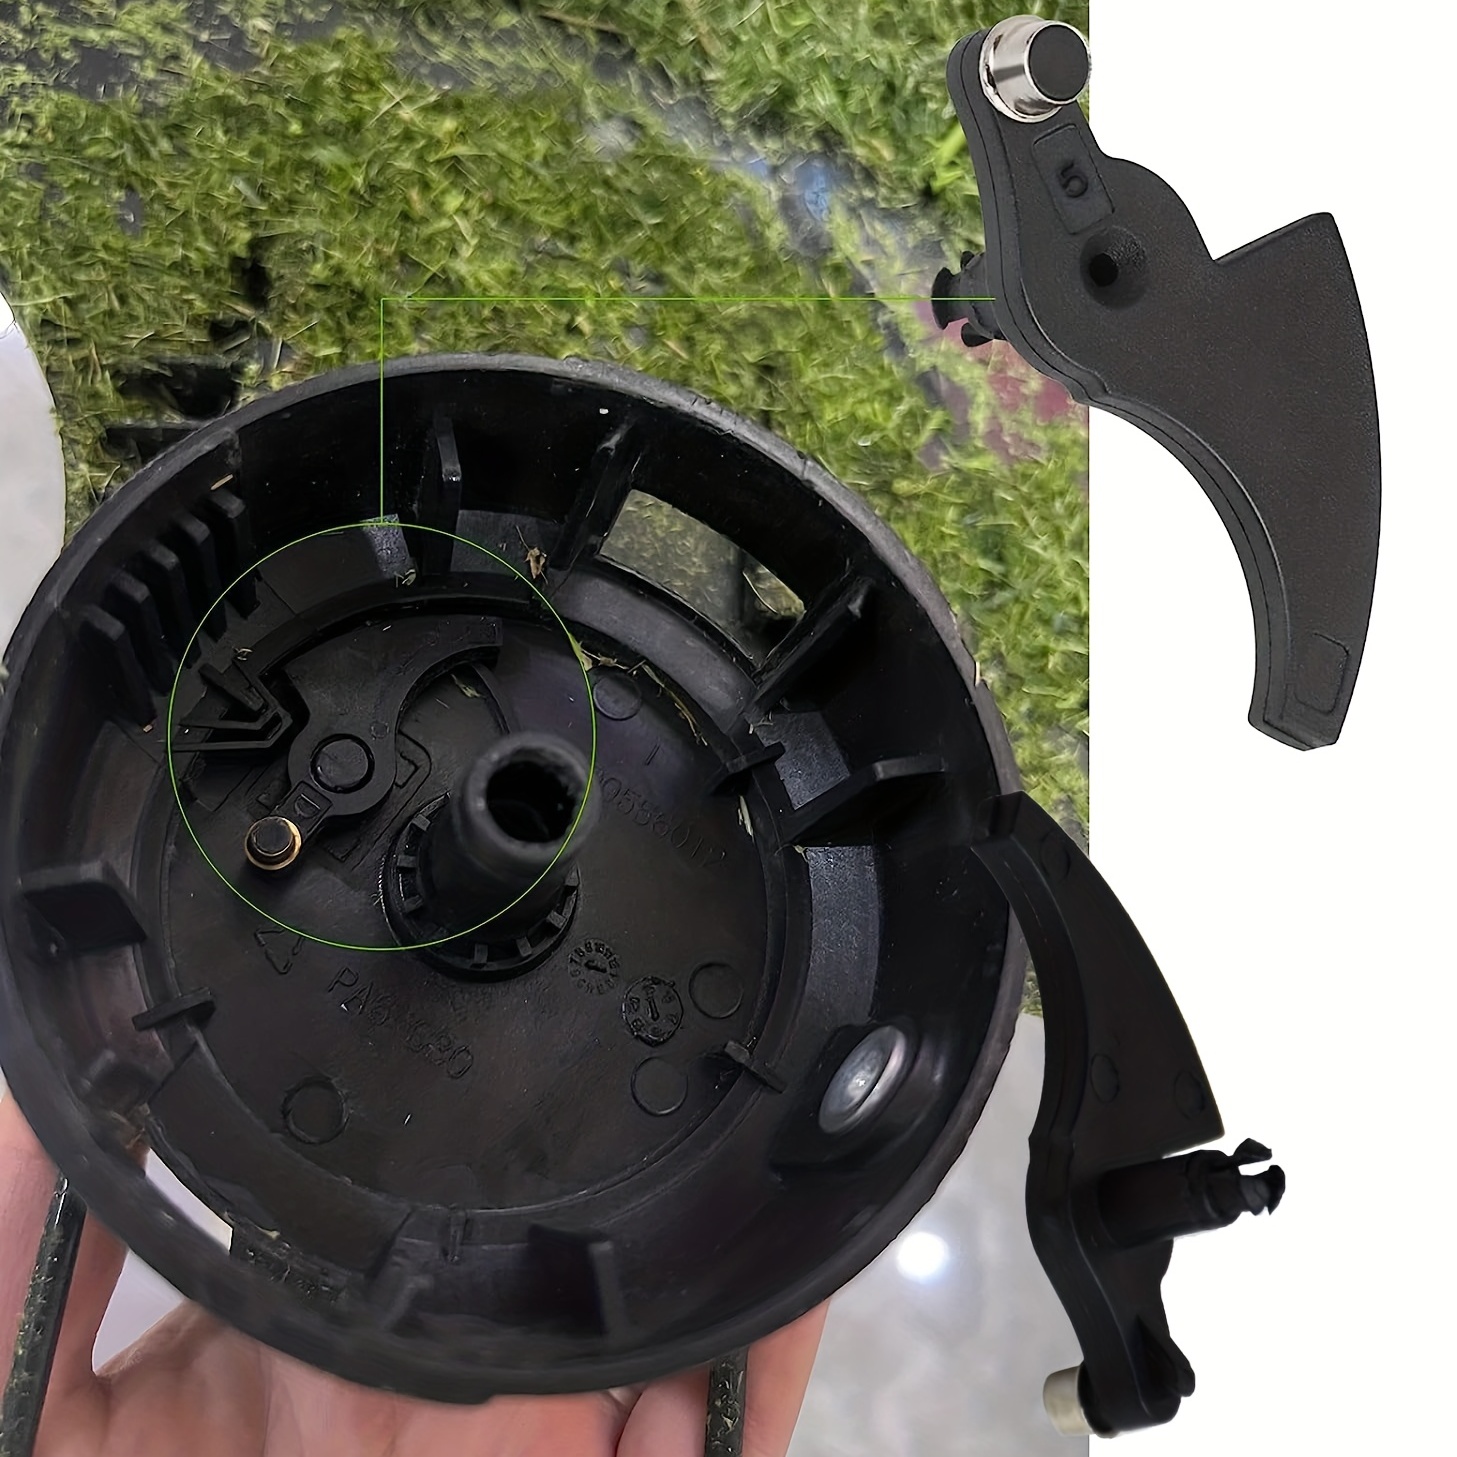 How to Replace the Spool Lever on a Black and Decker String Trimmer 